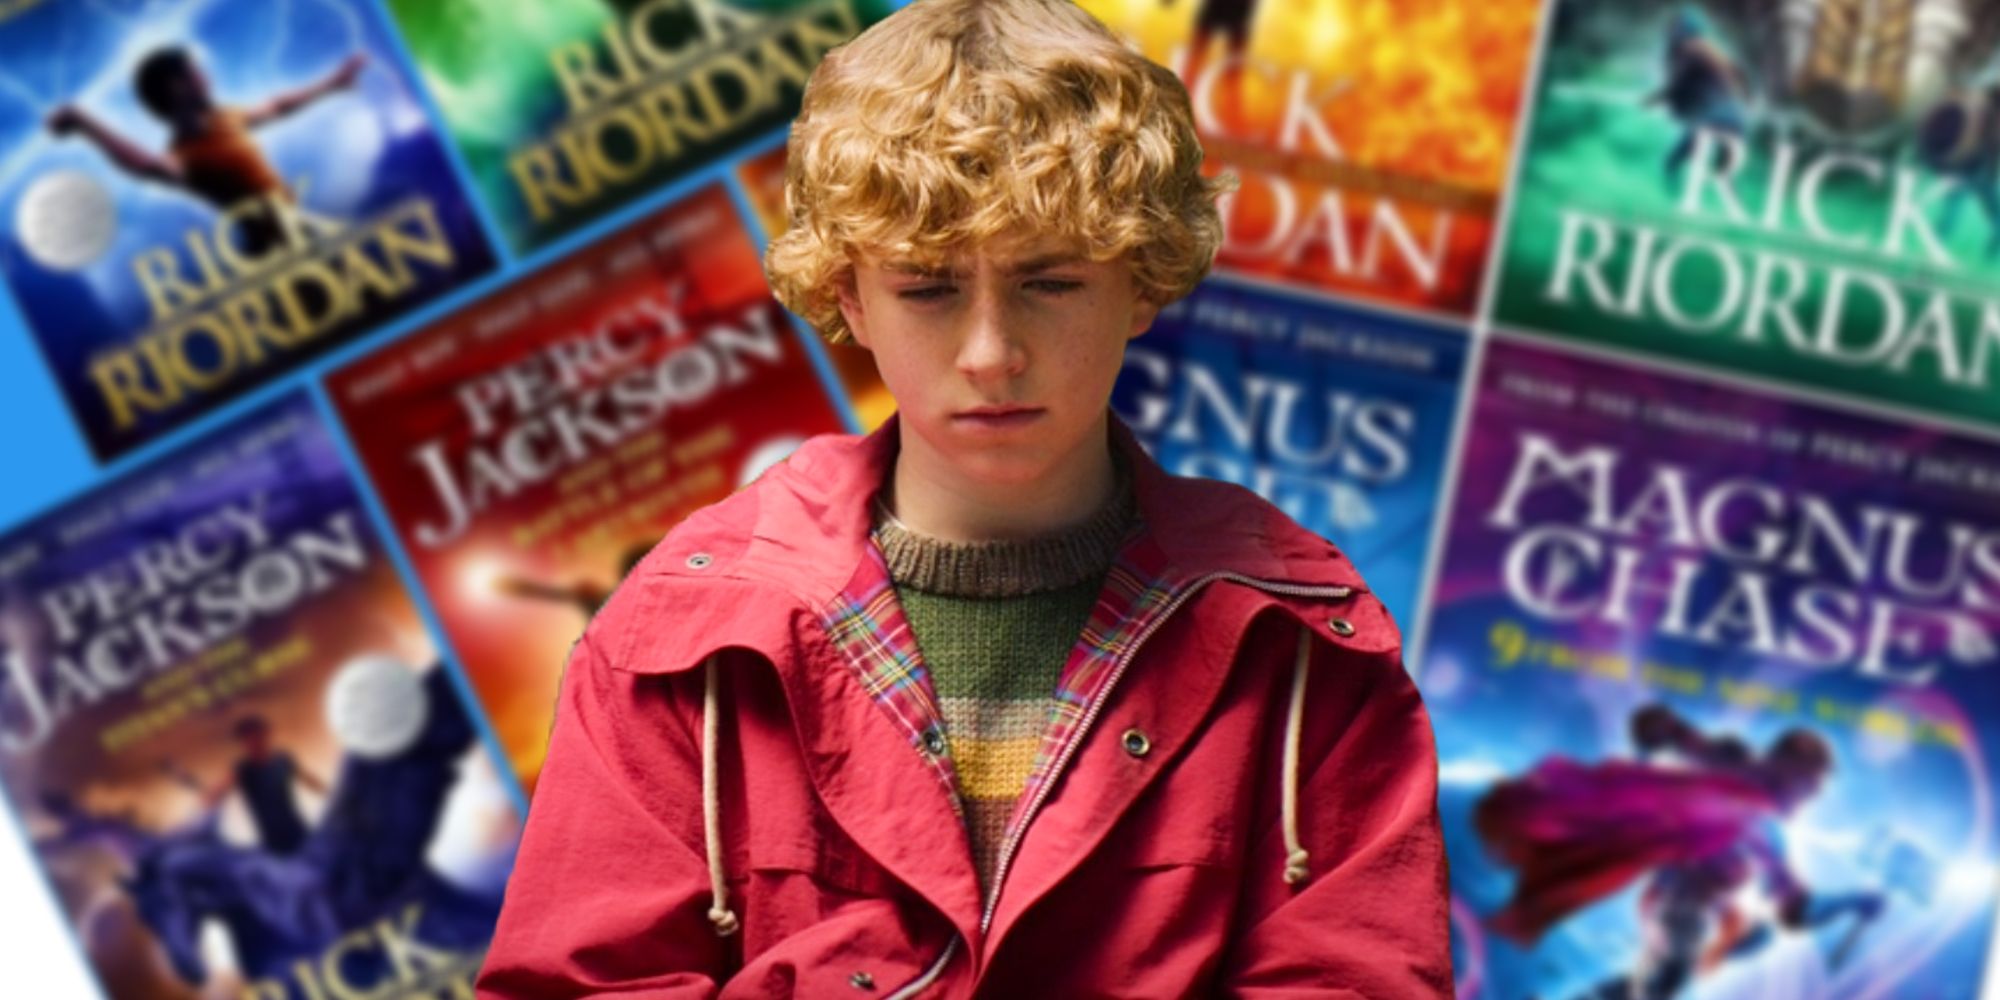 Walker Scobell as Percy Jackson between blurred images of the Percy Jackson and Magnus Chase books